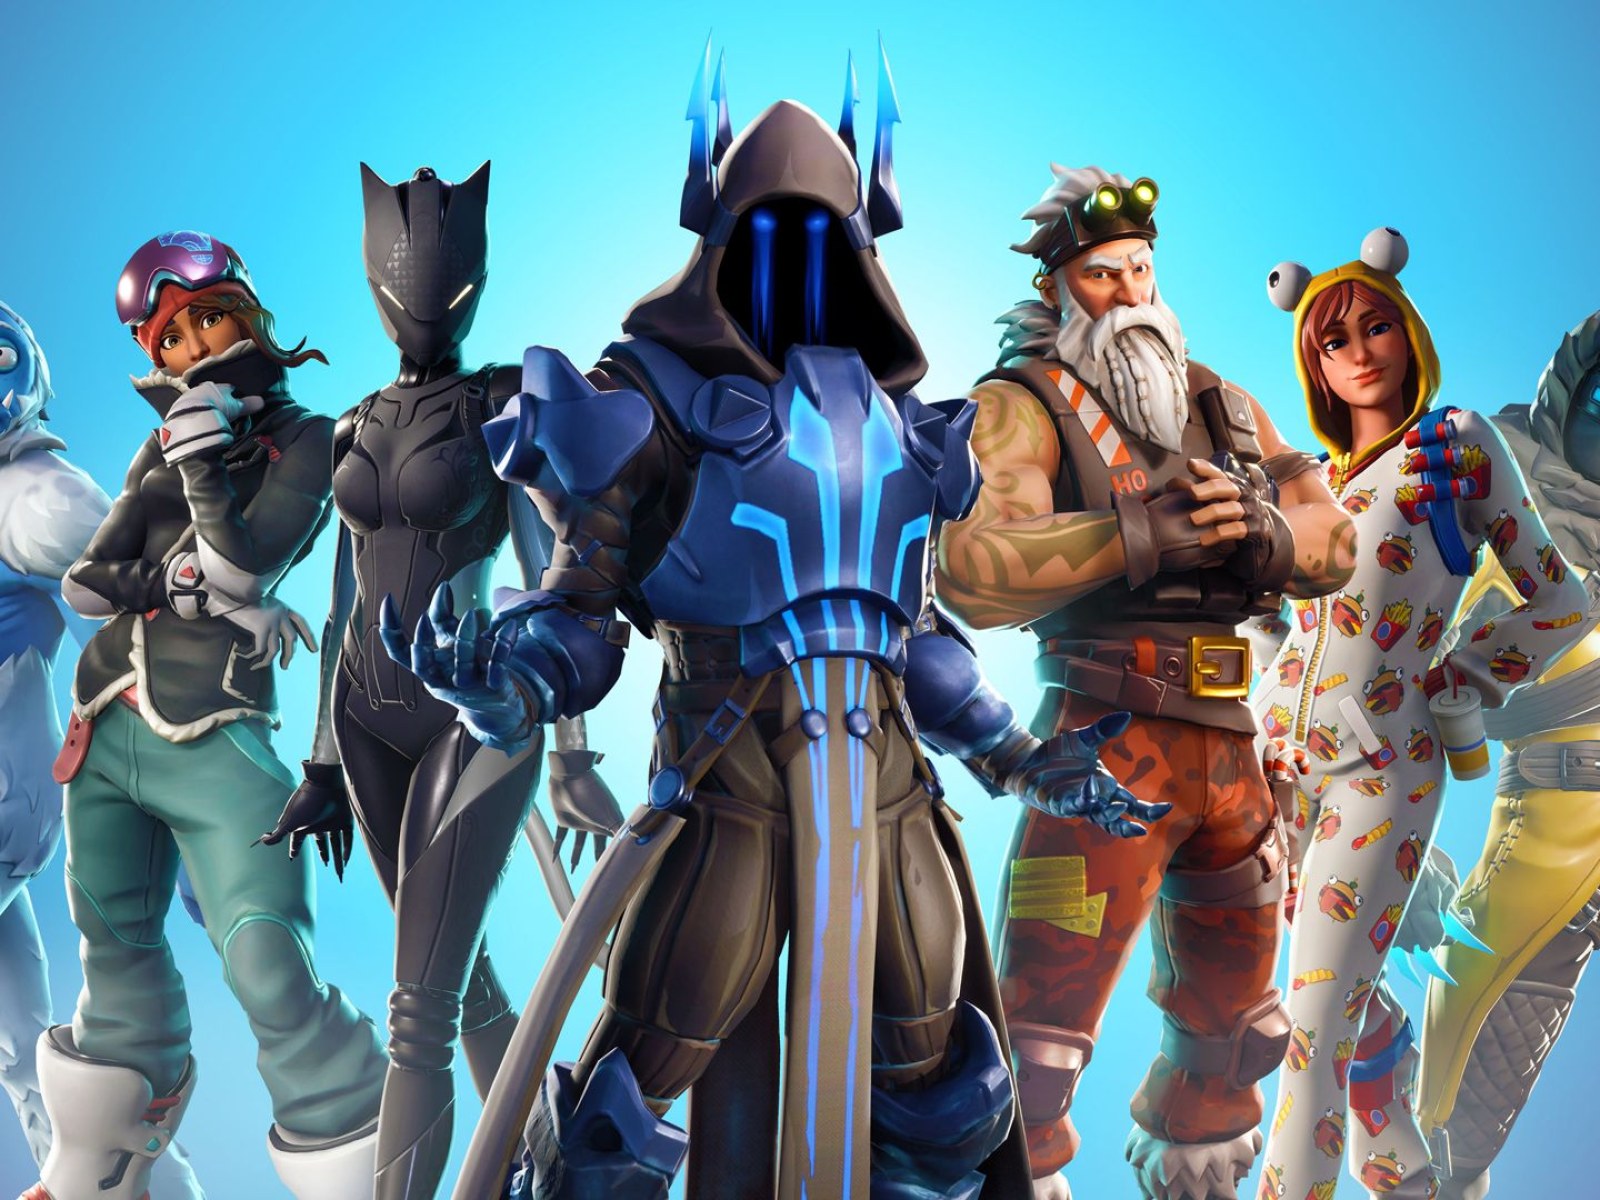 Ps4 To Switch Fortnite Skins Fortnite Account Merge Guide How To Transfer V Bucks Between Ps4 Xbox Switch